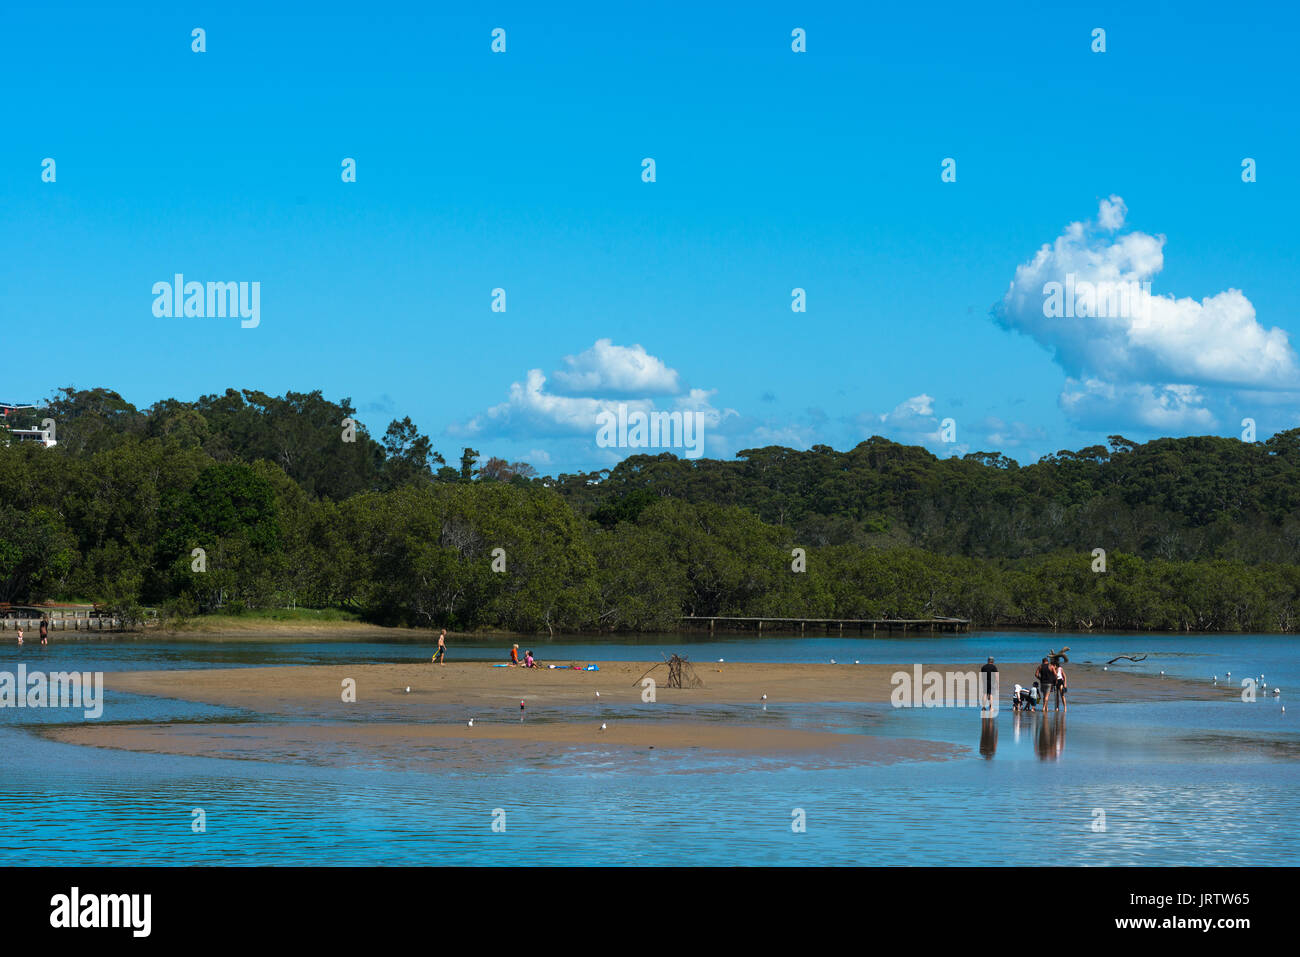 Coffs creek reaches the see at Park beach holiday park, Coffs Harbour, NSW, Australia. Stock Photo